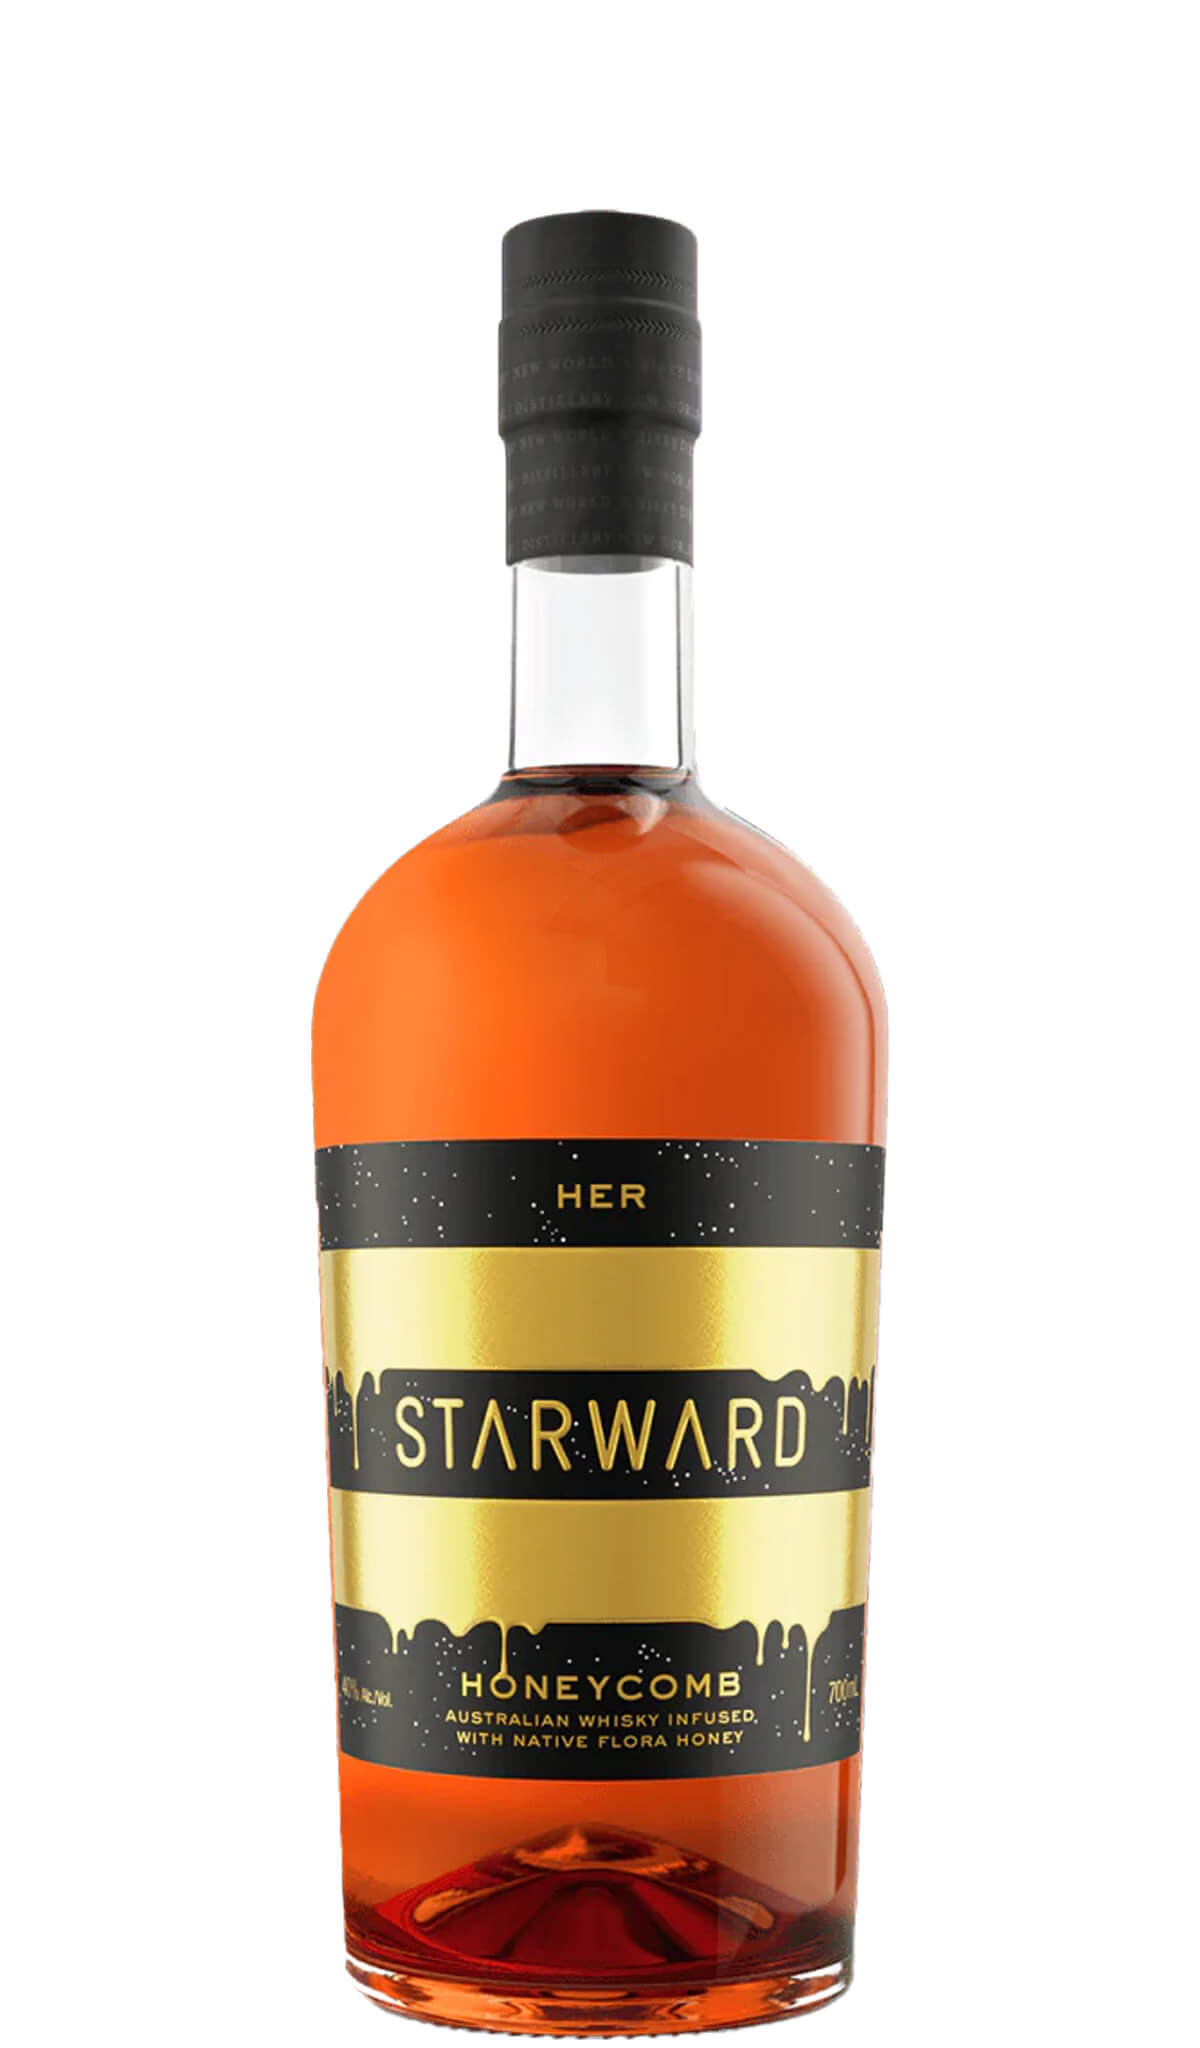 Find out more, explore the range and purchase Starward HER Honeycomb Double Grain Australian Whisky 700mL available online at Wine Sellers Direct - Australia's independent liquor specialists.